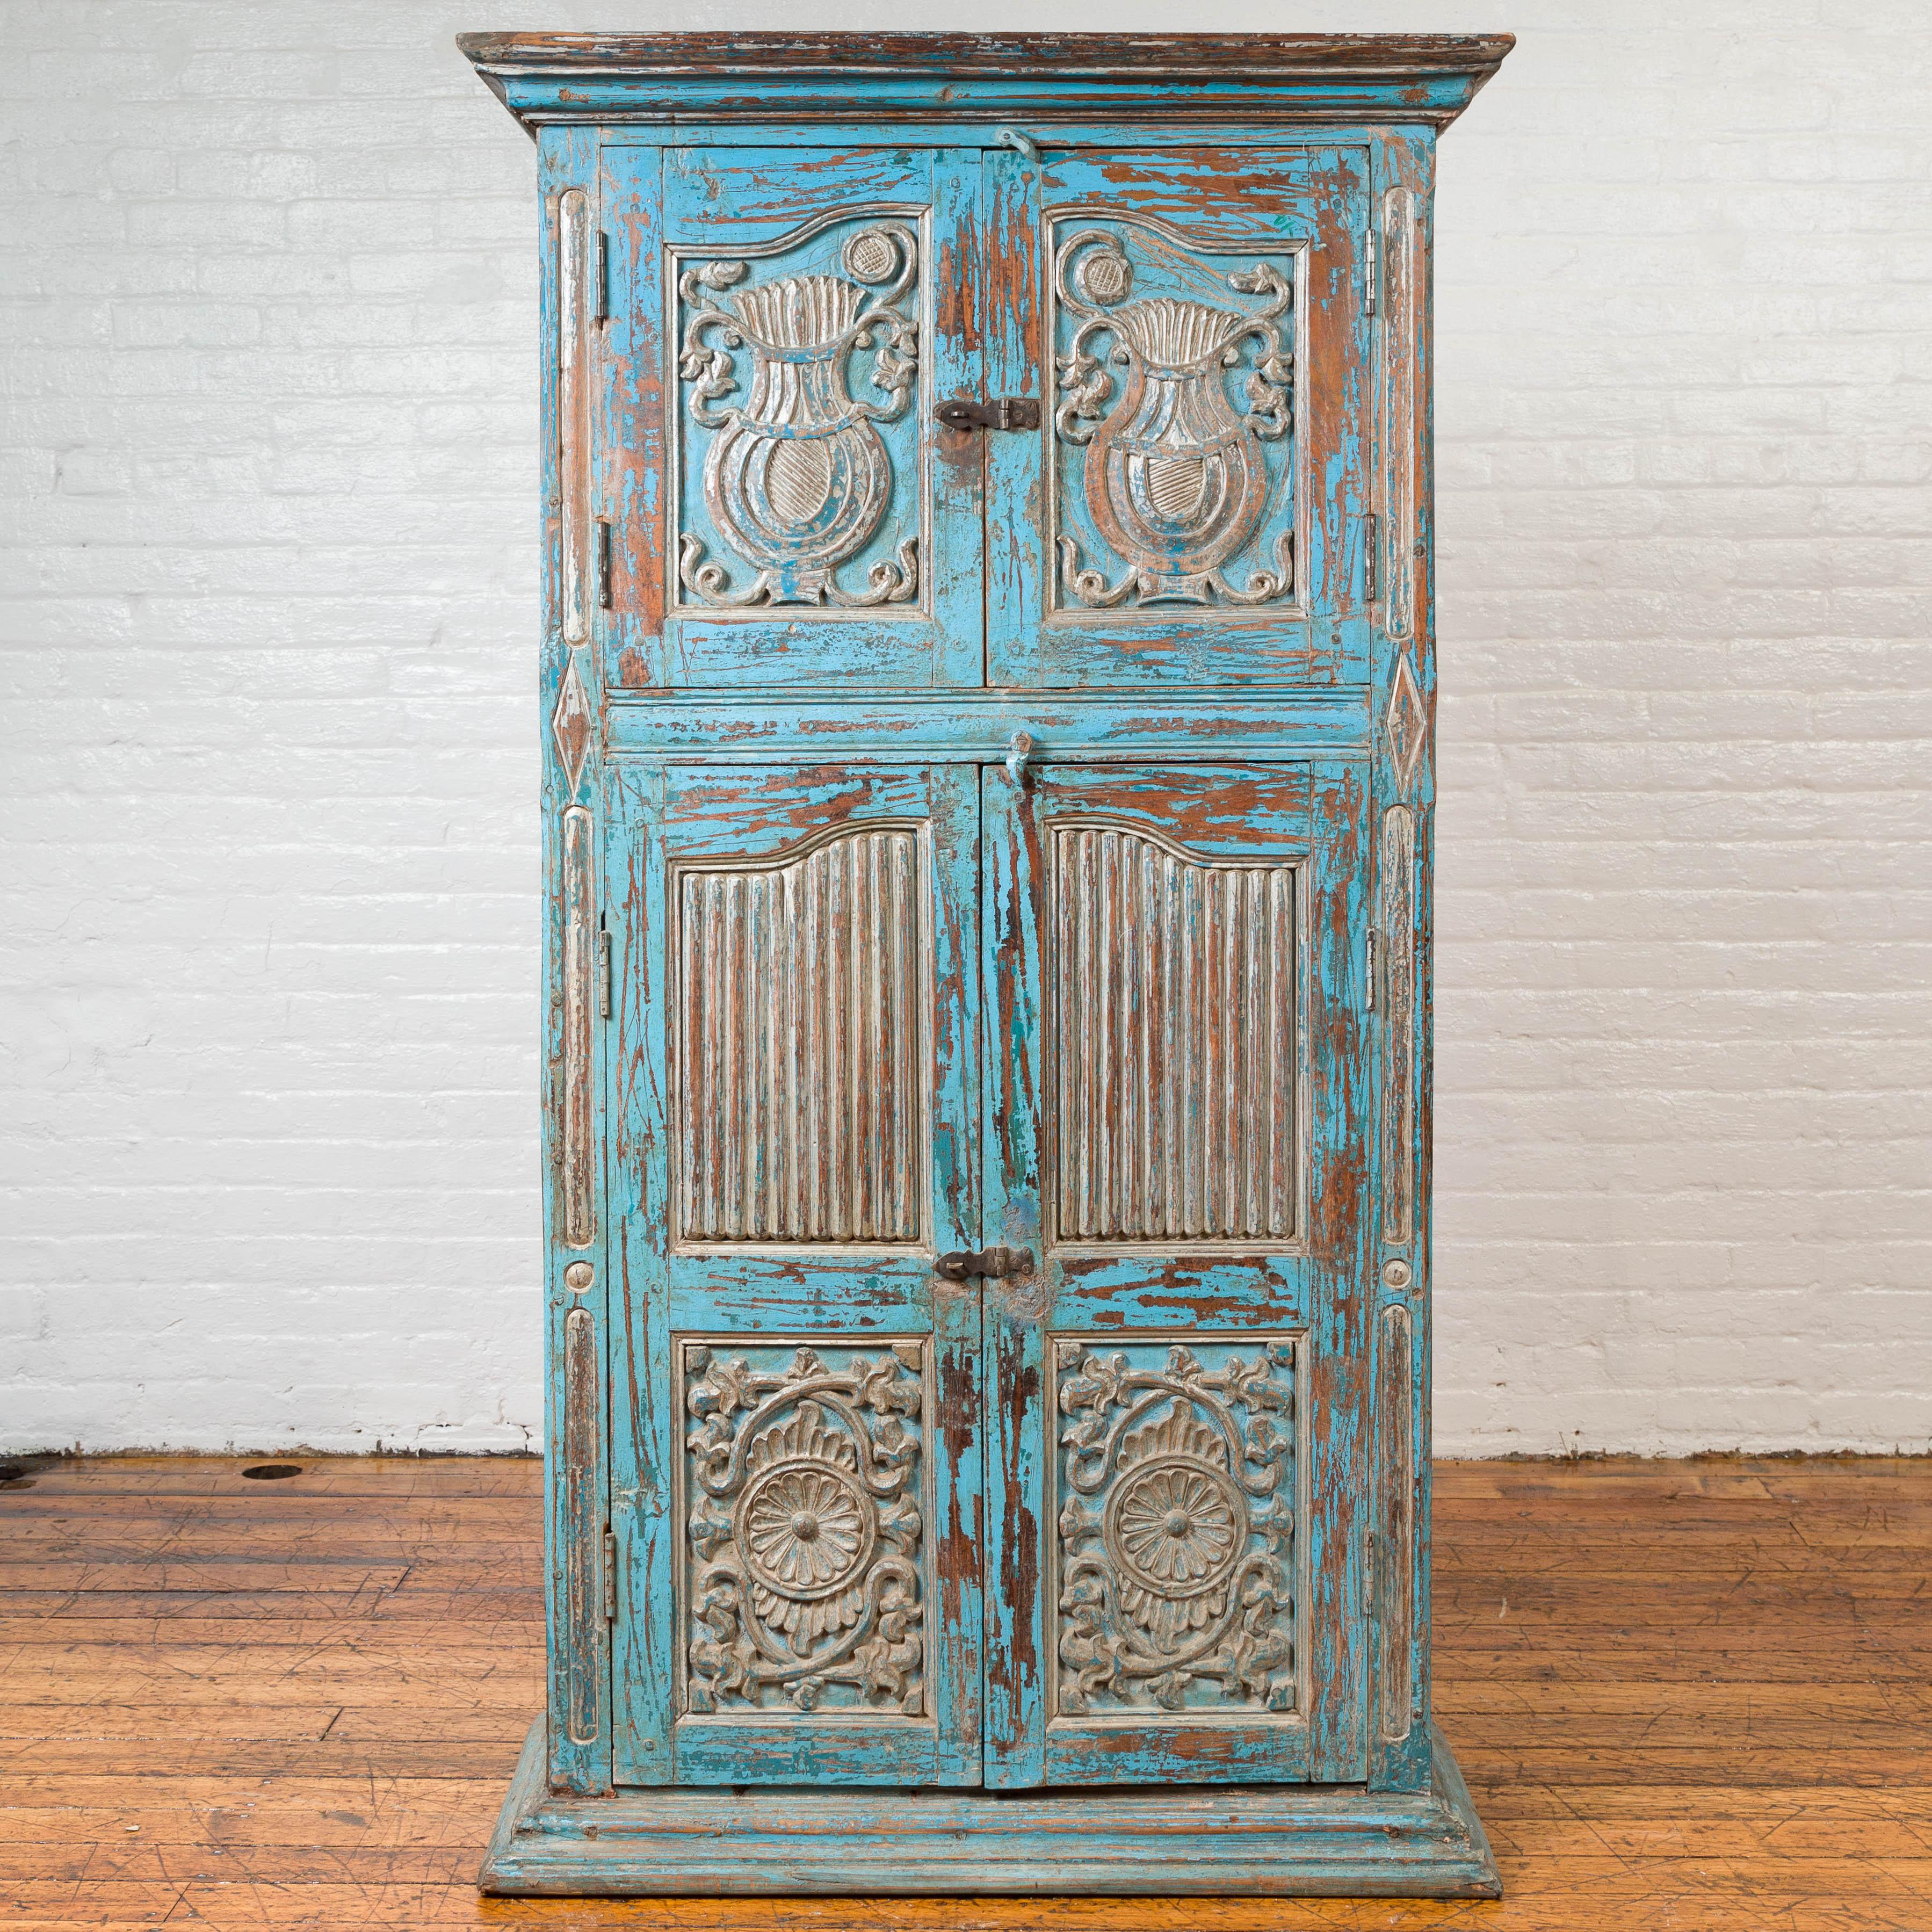 An antique Indian two-section blue painted wooden cabinet with carved panels. Featuring a tall silhouette and a hand-rubbed blue painted finish showing a nicely weathered appearance, this tall cabinet is made of two sections. A beveled cornice sits